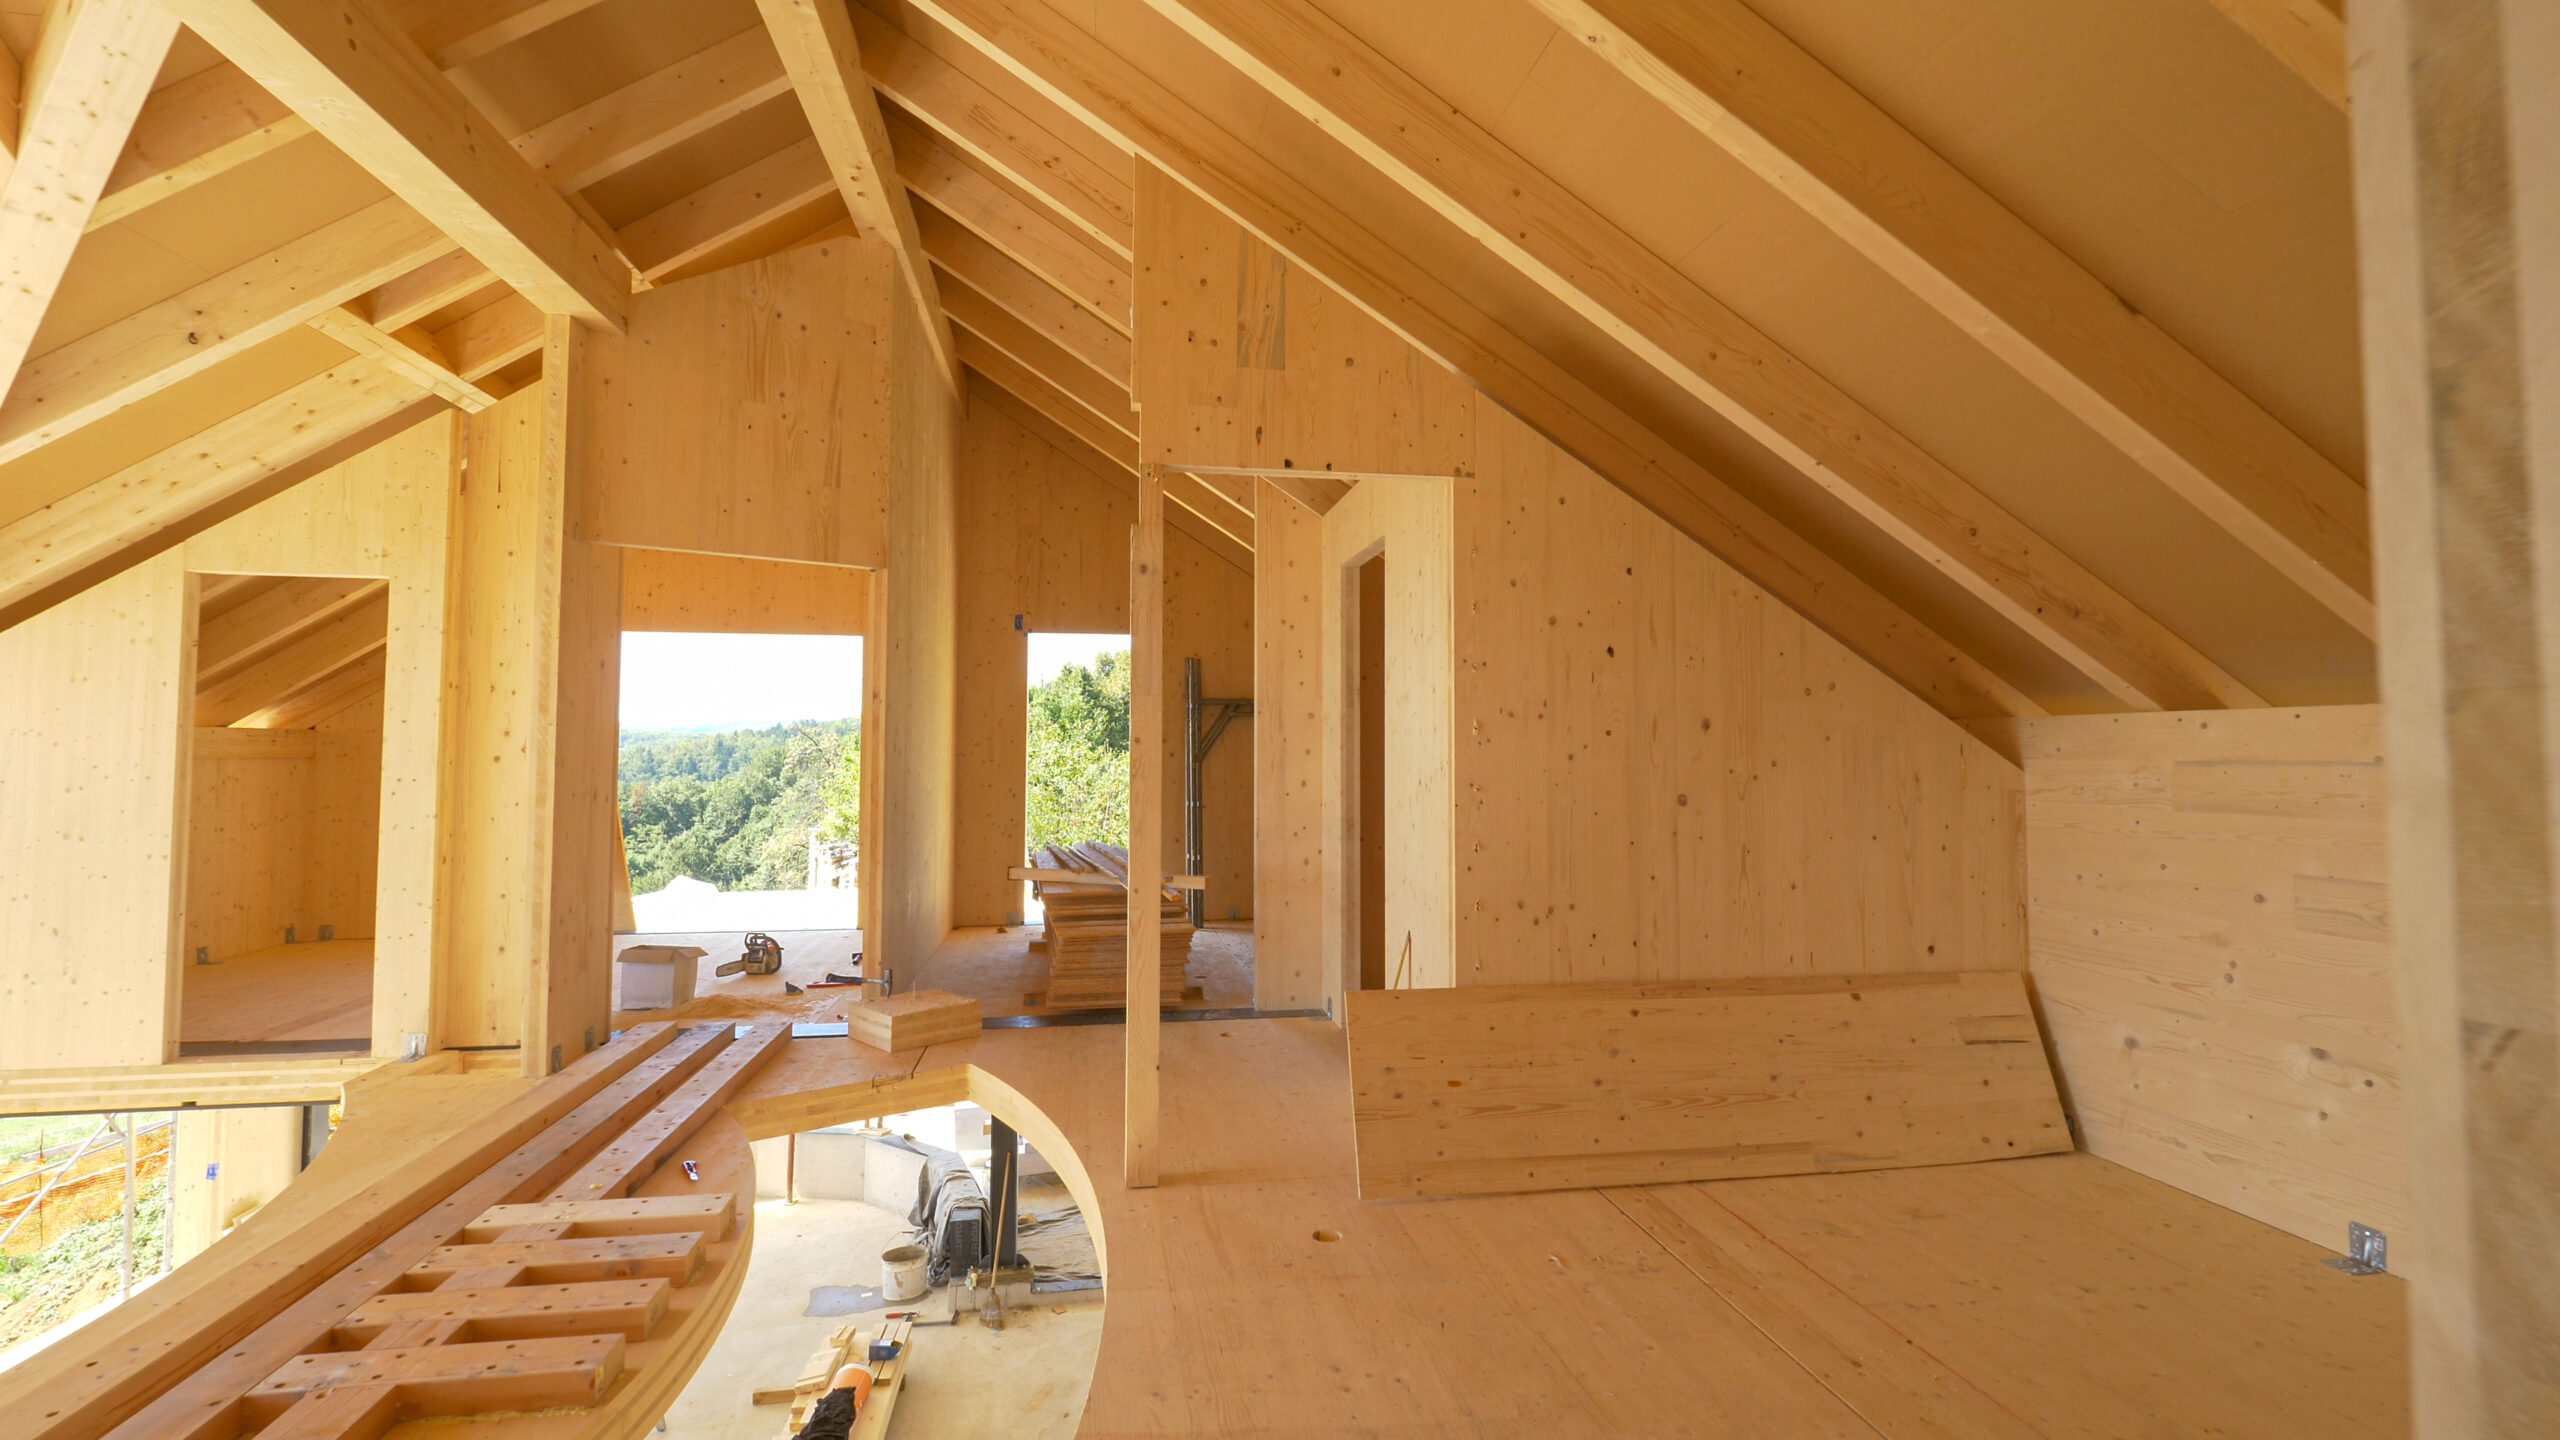 Want to build in wood? Consider covering at least 80 % of mass timber surfaces